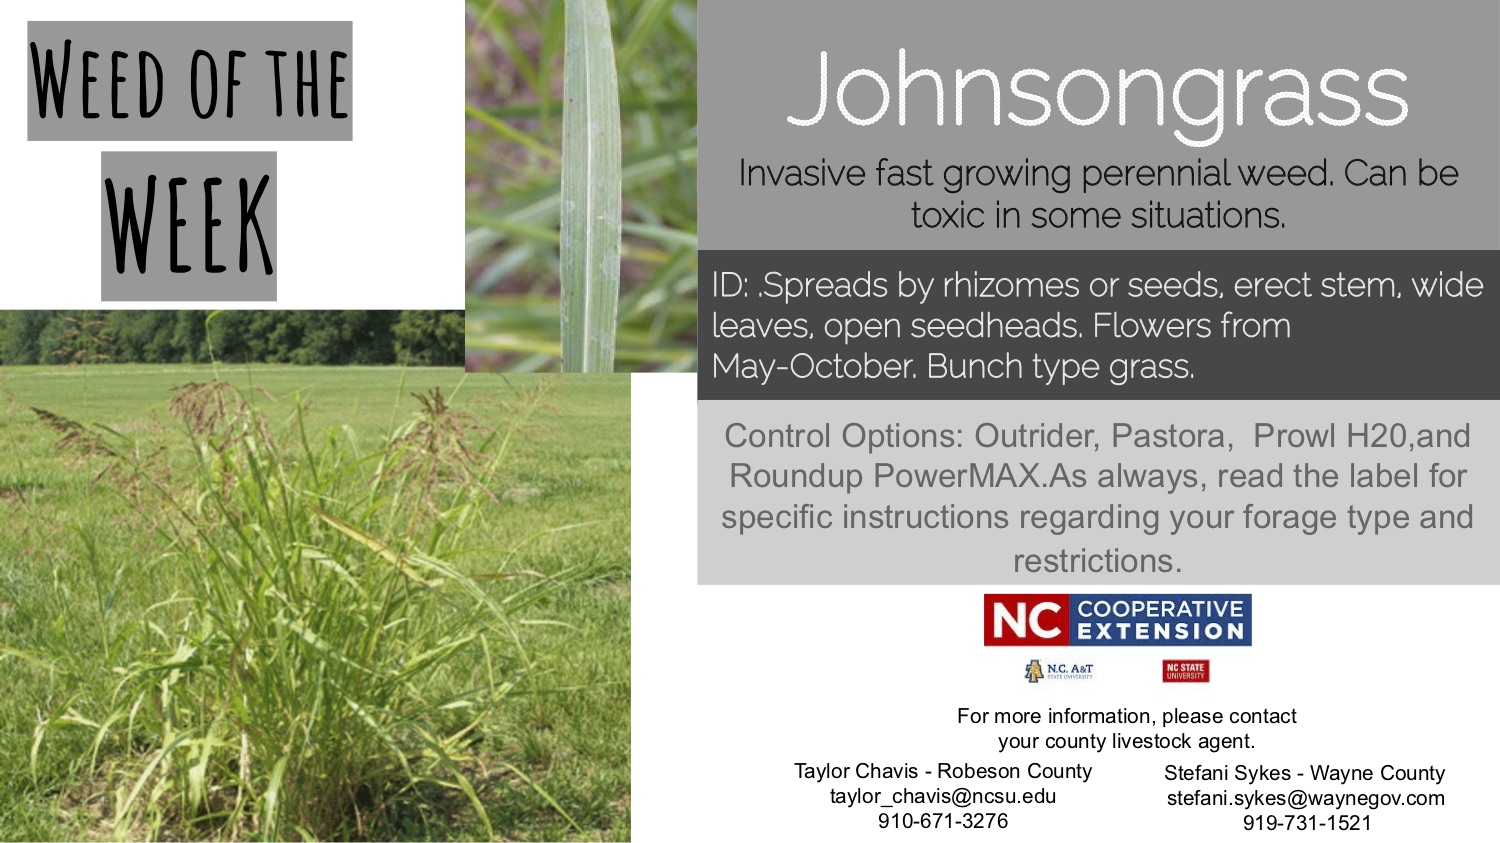 Information on the weed Johnsongrass